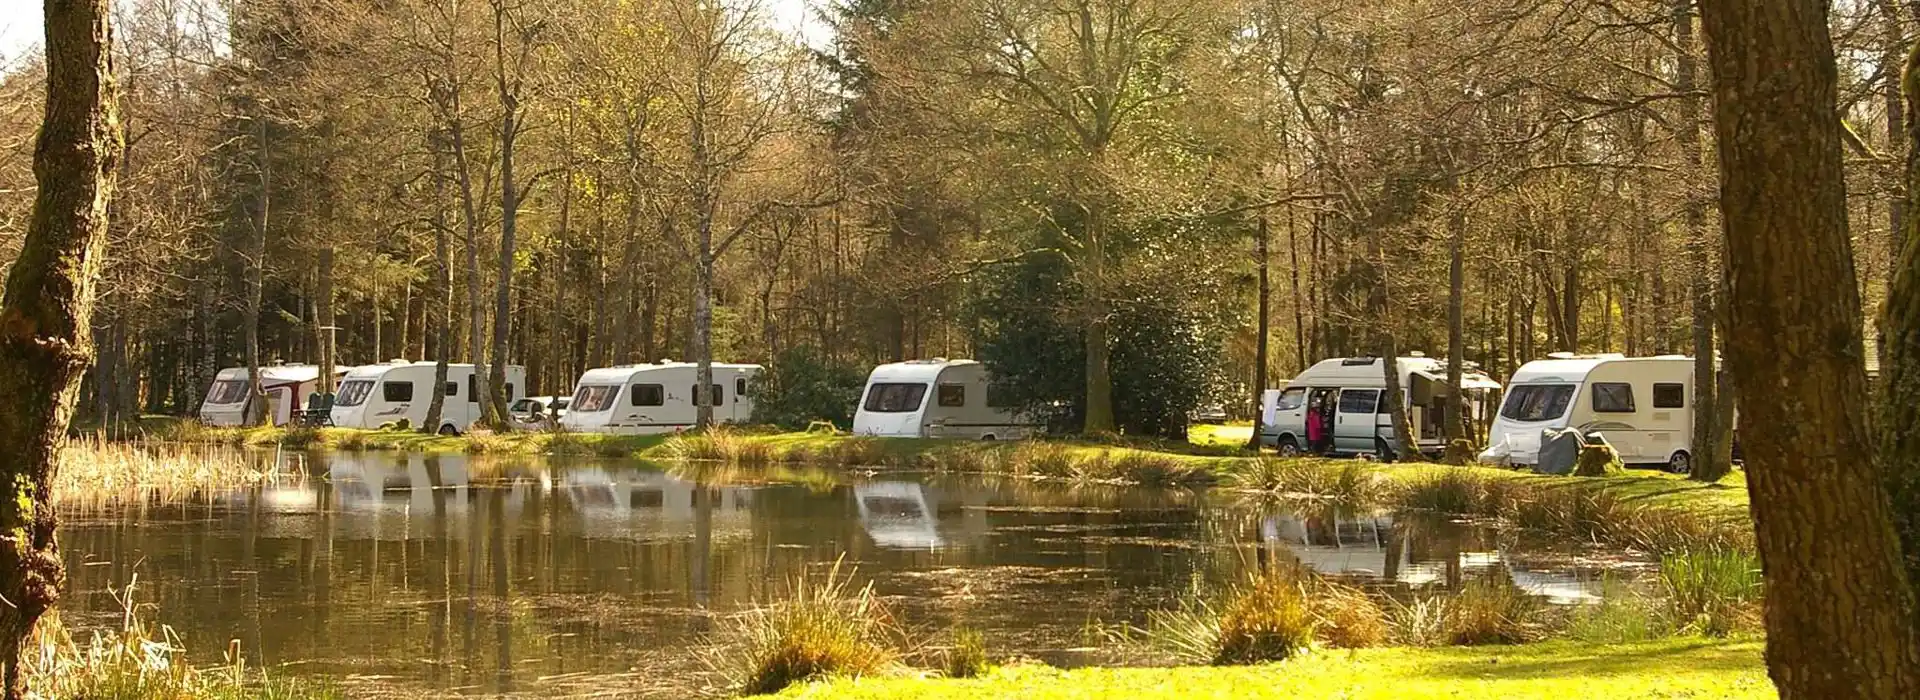 Caravan parks in Dundee and Angus